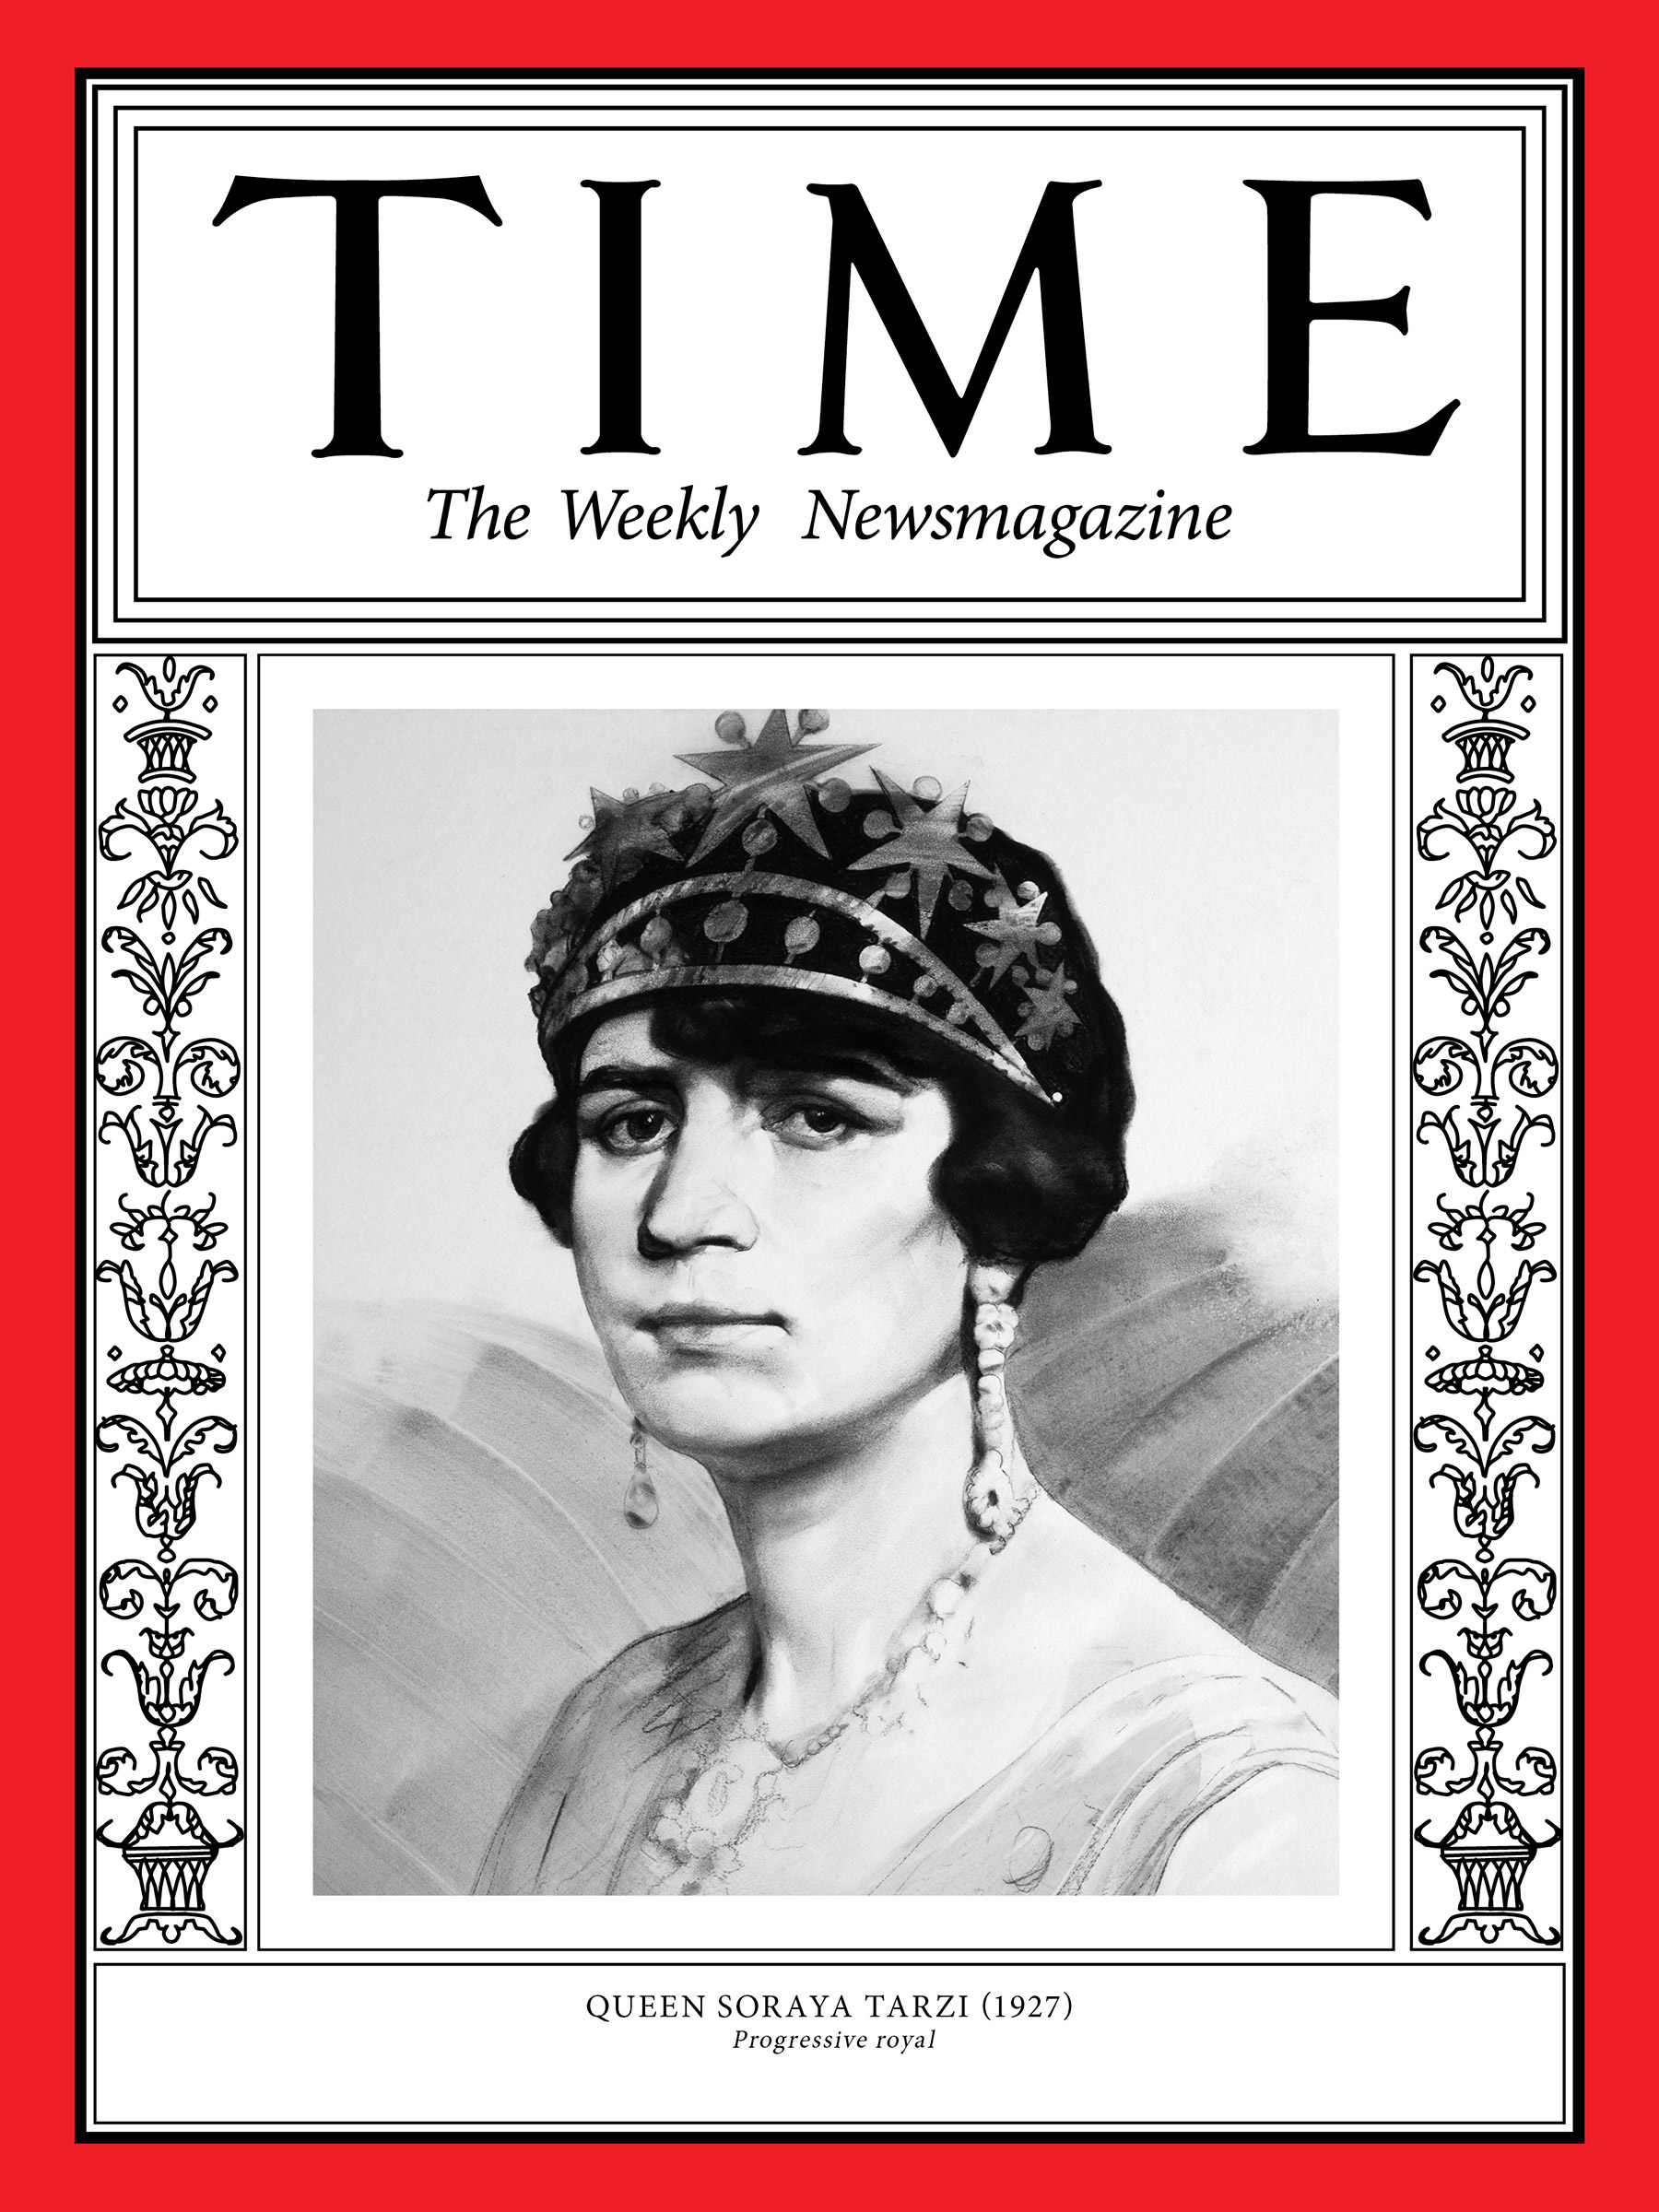 <a href="https://fineartamerica.com/featured/queen-soraya-tarzi-1927-time.html"><strong>Buy the cover art→</strong></a> (Illustration by Ivan Loginov for TIME; Rykoff Collection/Getty)